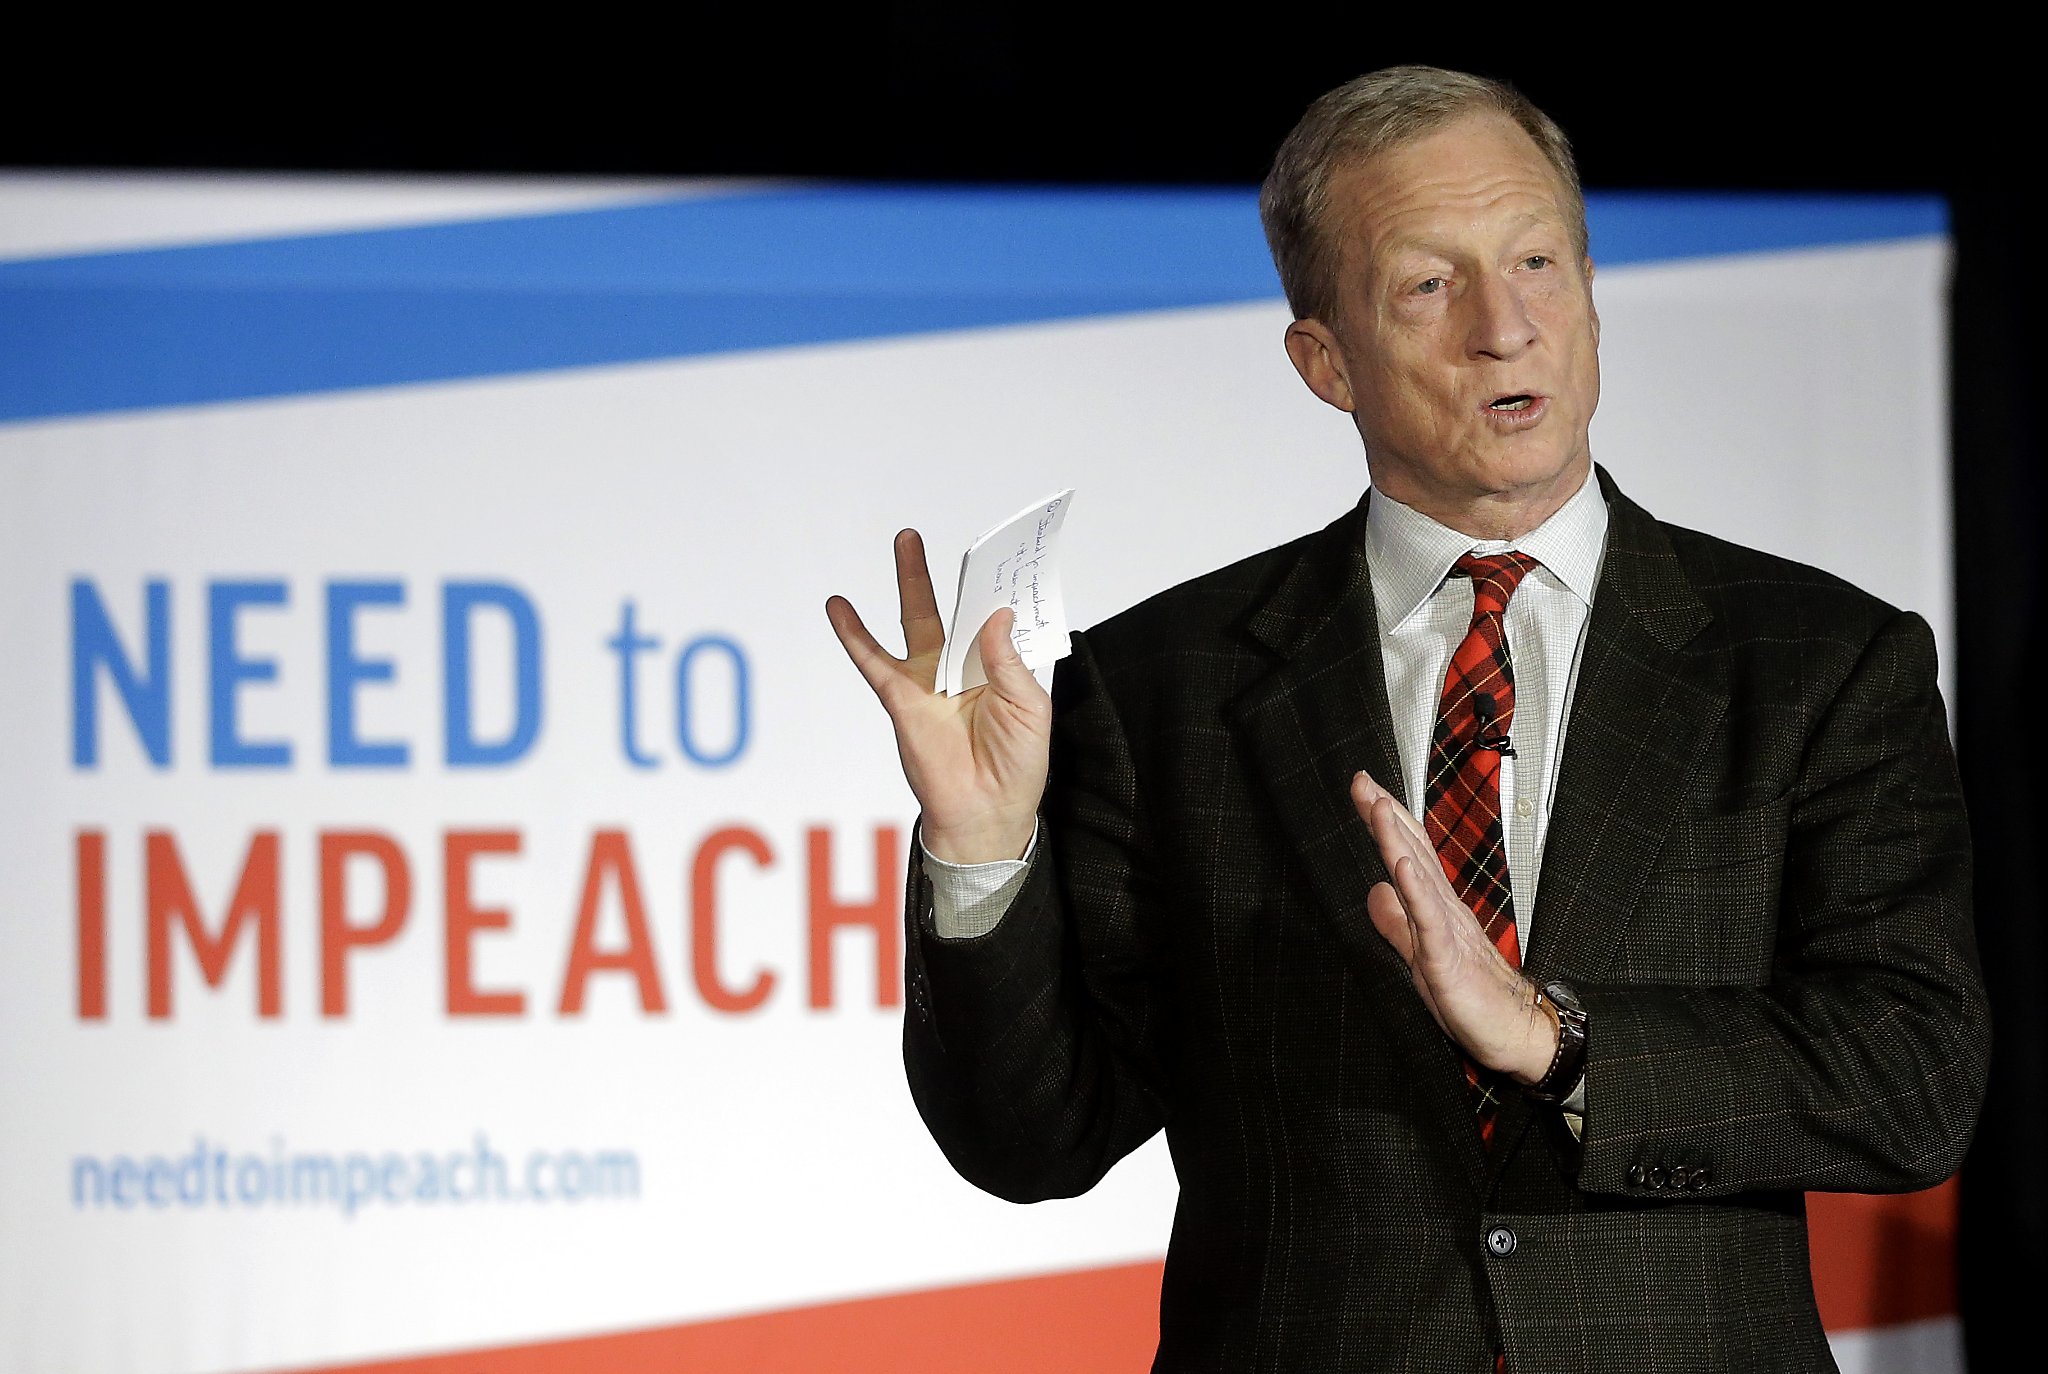 Billionaire San Francisco Democratic donor Tom Steyer may run for president after all ...2048 x 1374